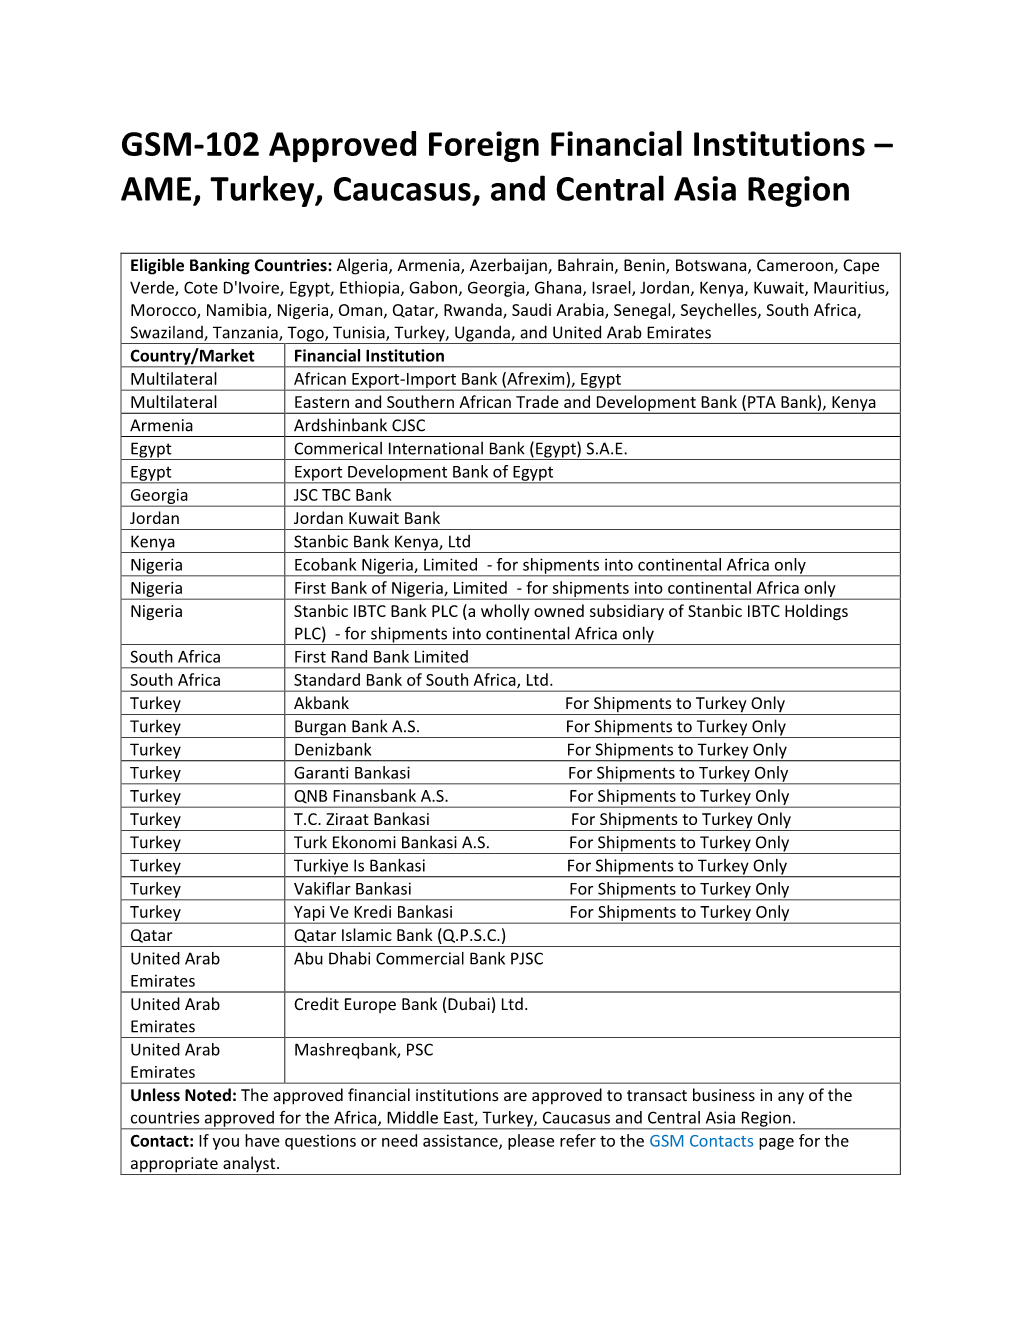 GSM-102 Approved Foreign Financial Institutions – AME, Turkey, Caucasus, and Central Asia Region